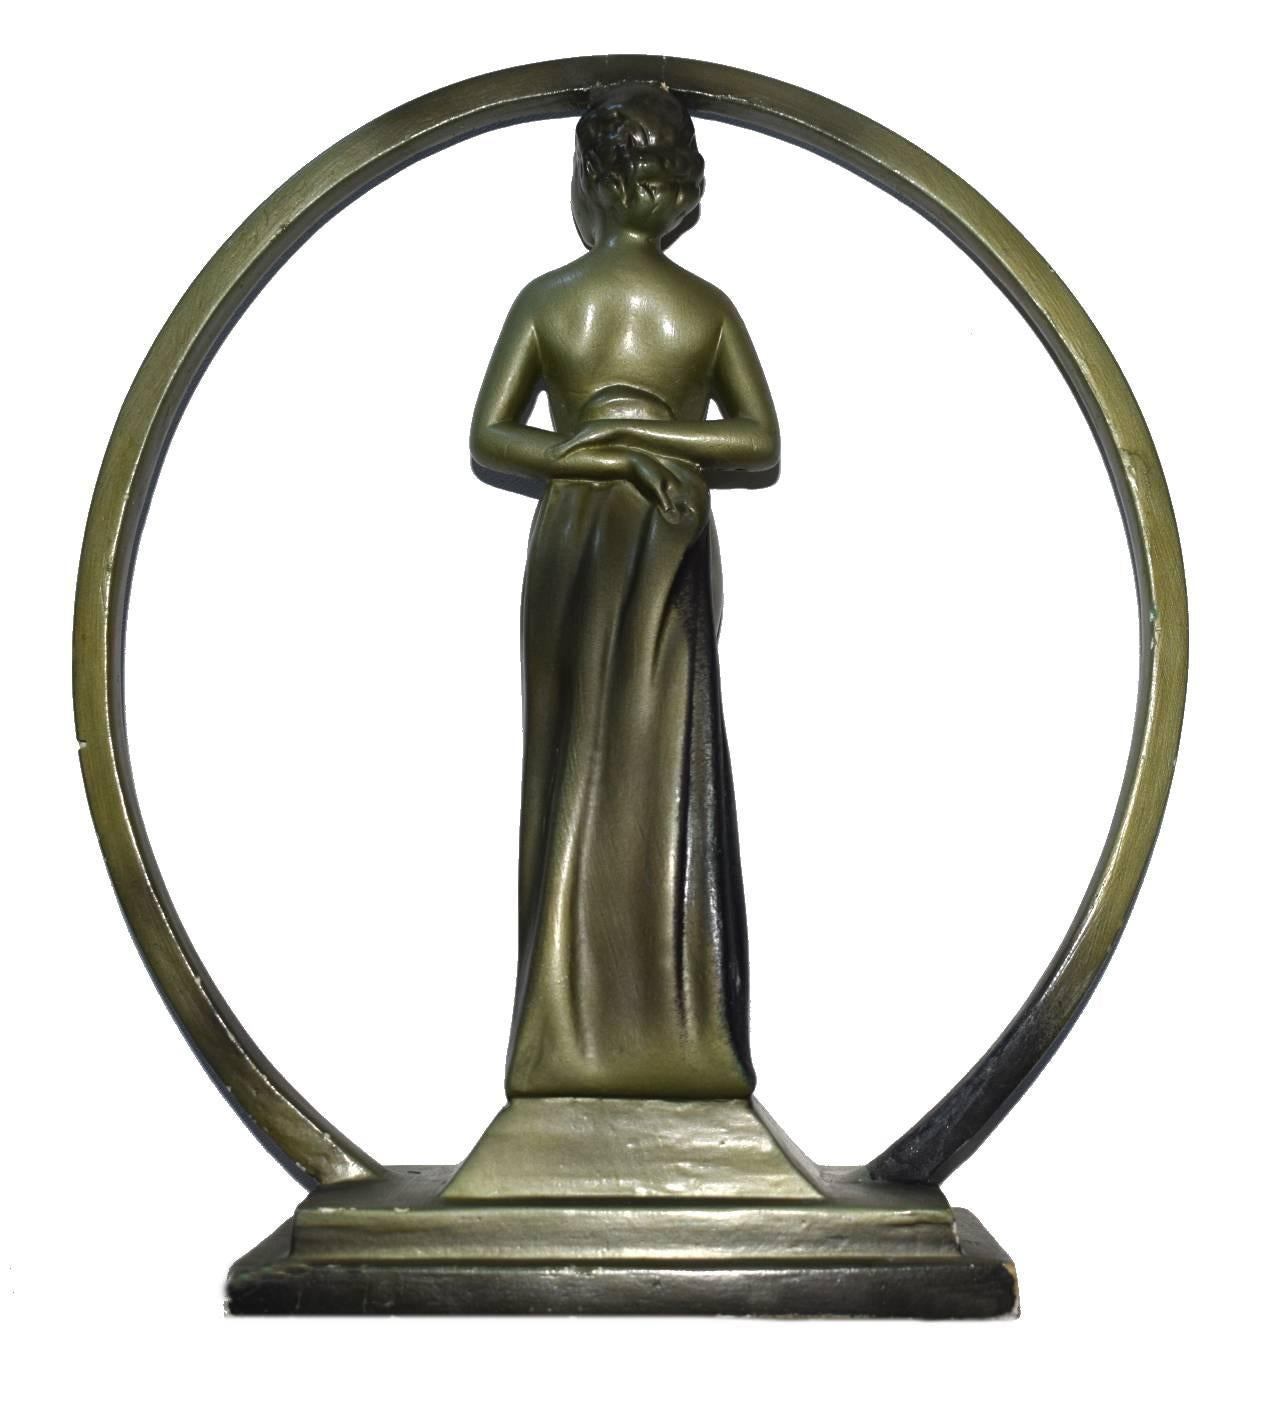 An original Art Deco plaster figurine of a nude lady standing in a hoop. The overall height is 12 inches. The figure stands on a stepped base within the hoop and is very well modelled with a beautiful face. There are no makers mark but it is a good